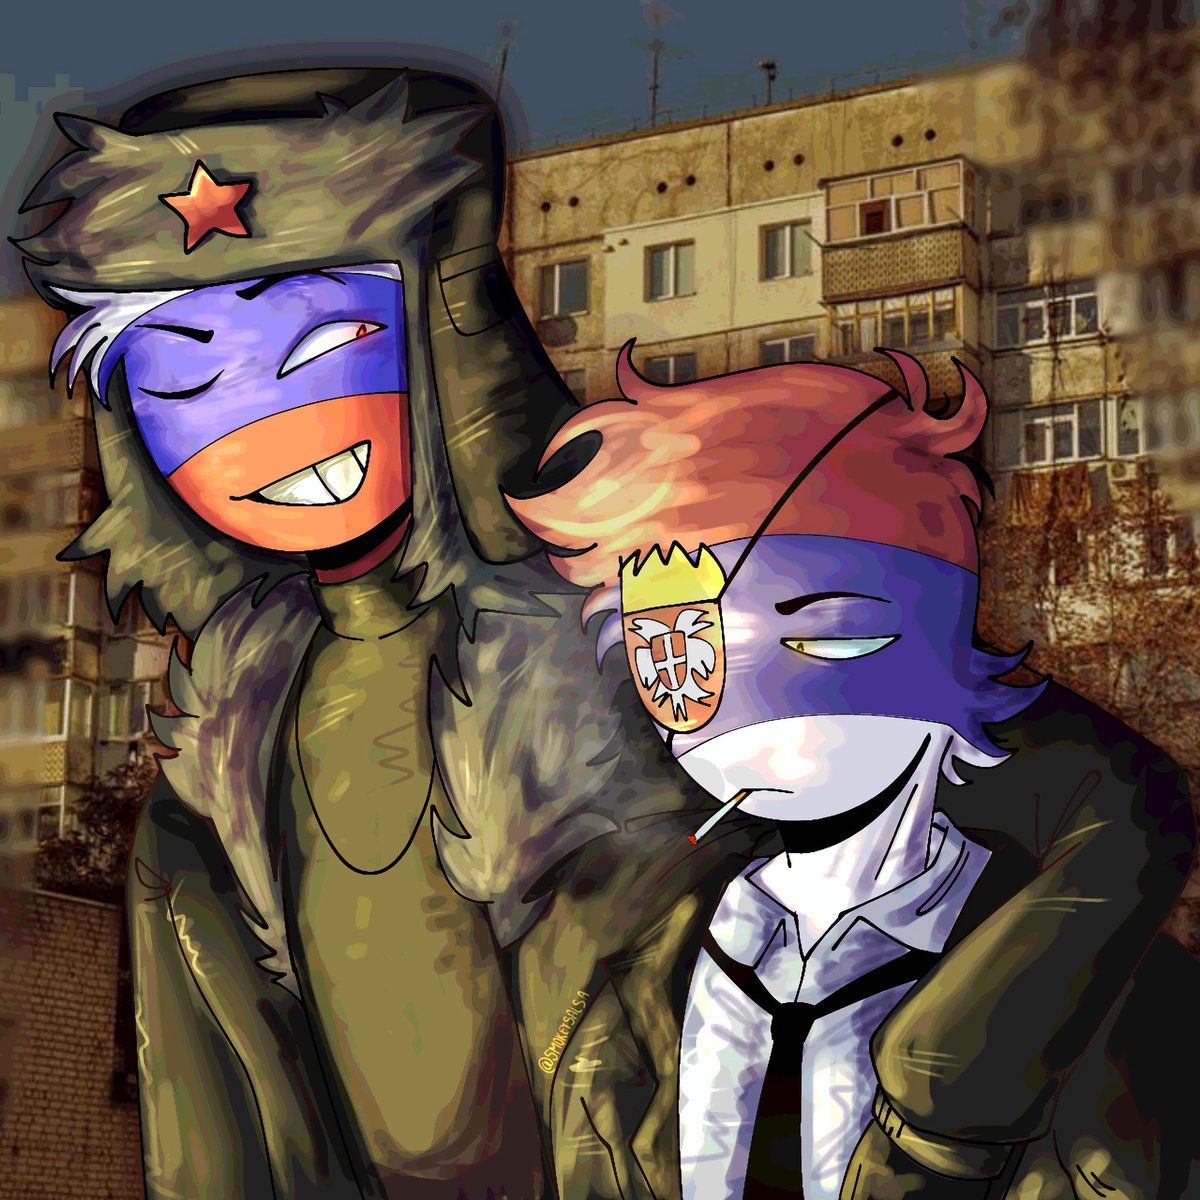 Sorry for being inactive, i couldn't post or finish many drawing because of school 

#countryhumans
#countryhumansSerbia
#countryhumansRussia